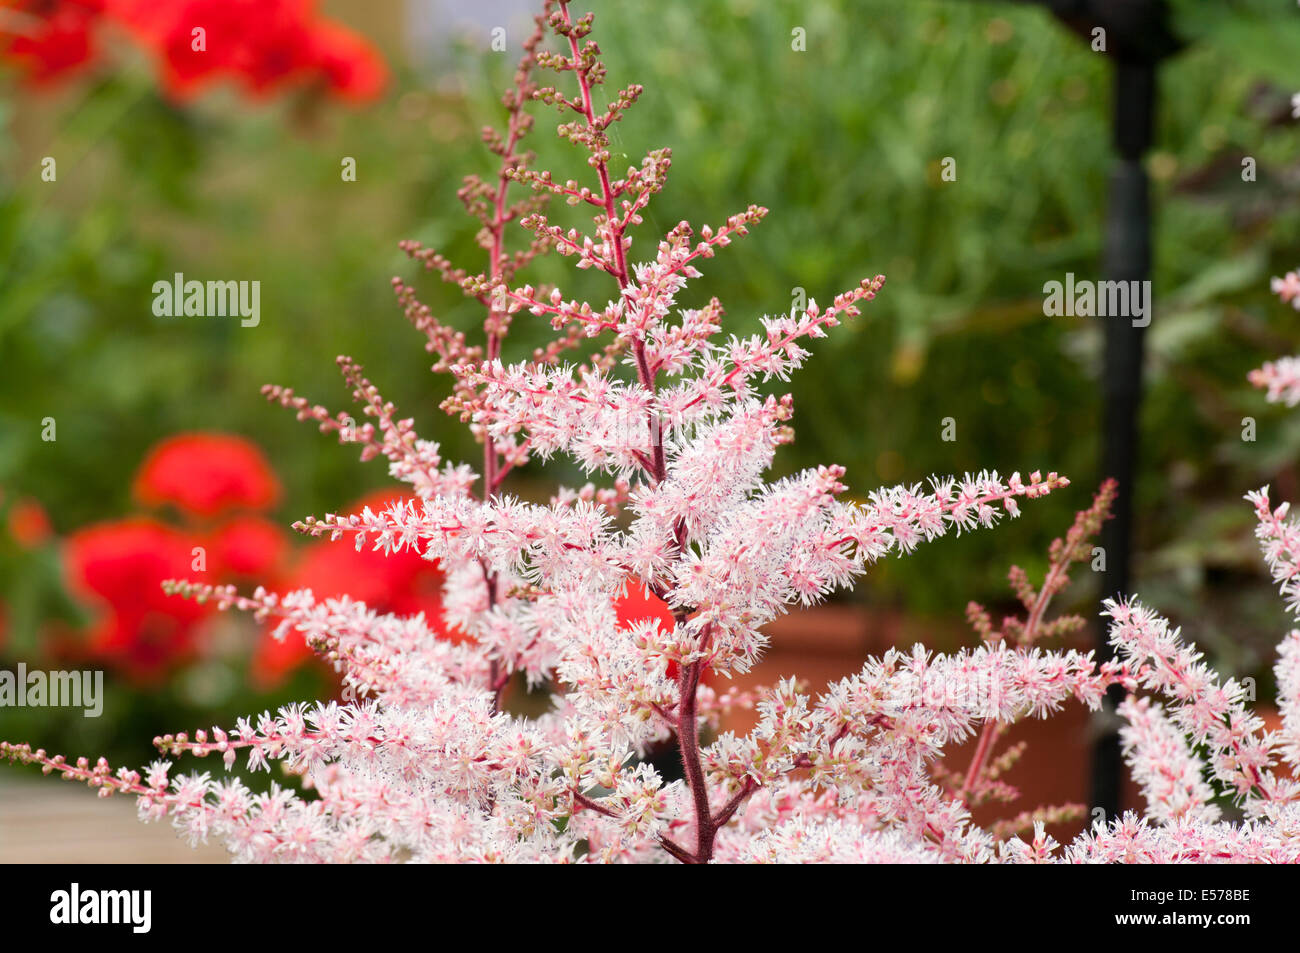 Astilbe Delft Lace Commonly Known as false goats beard and false spirea Stock Photo